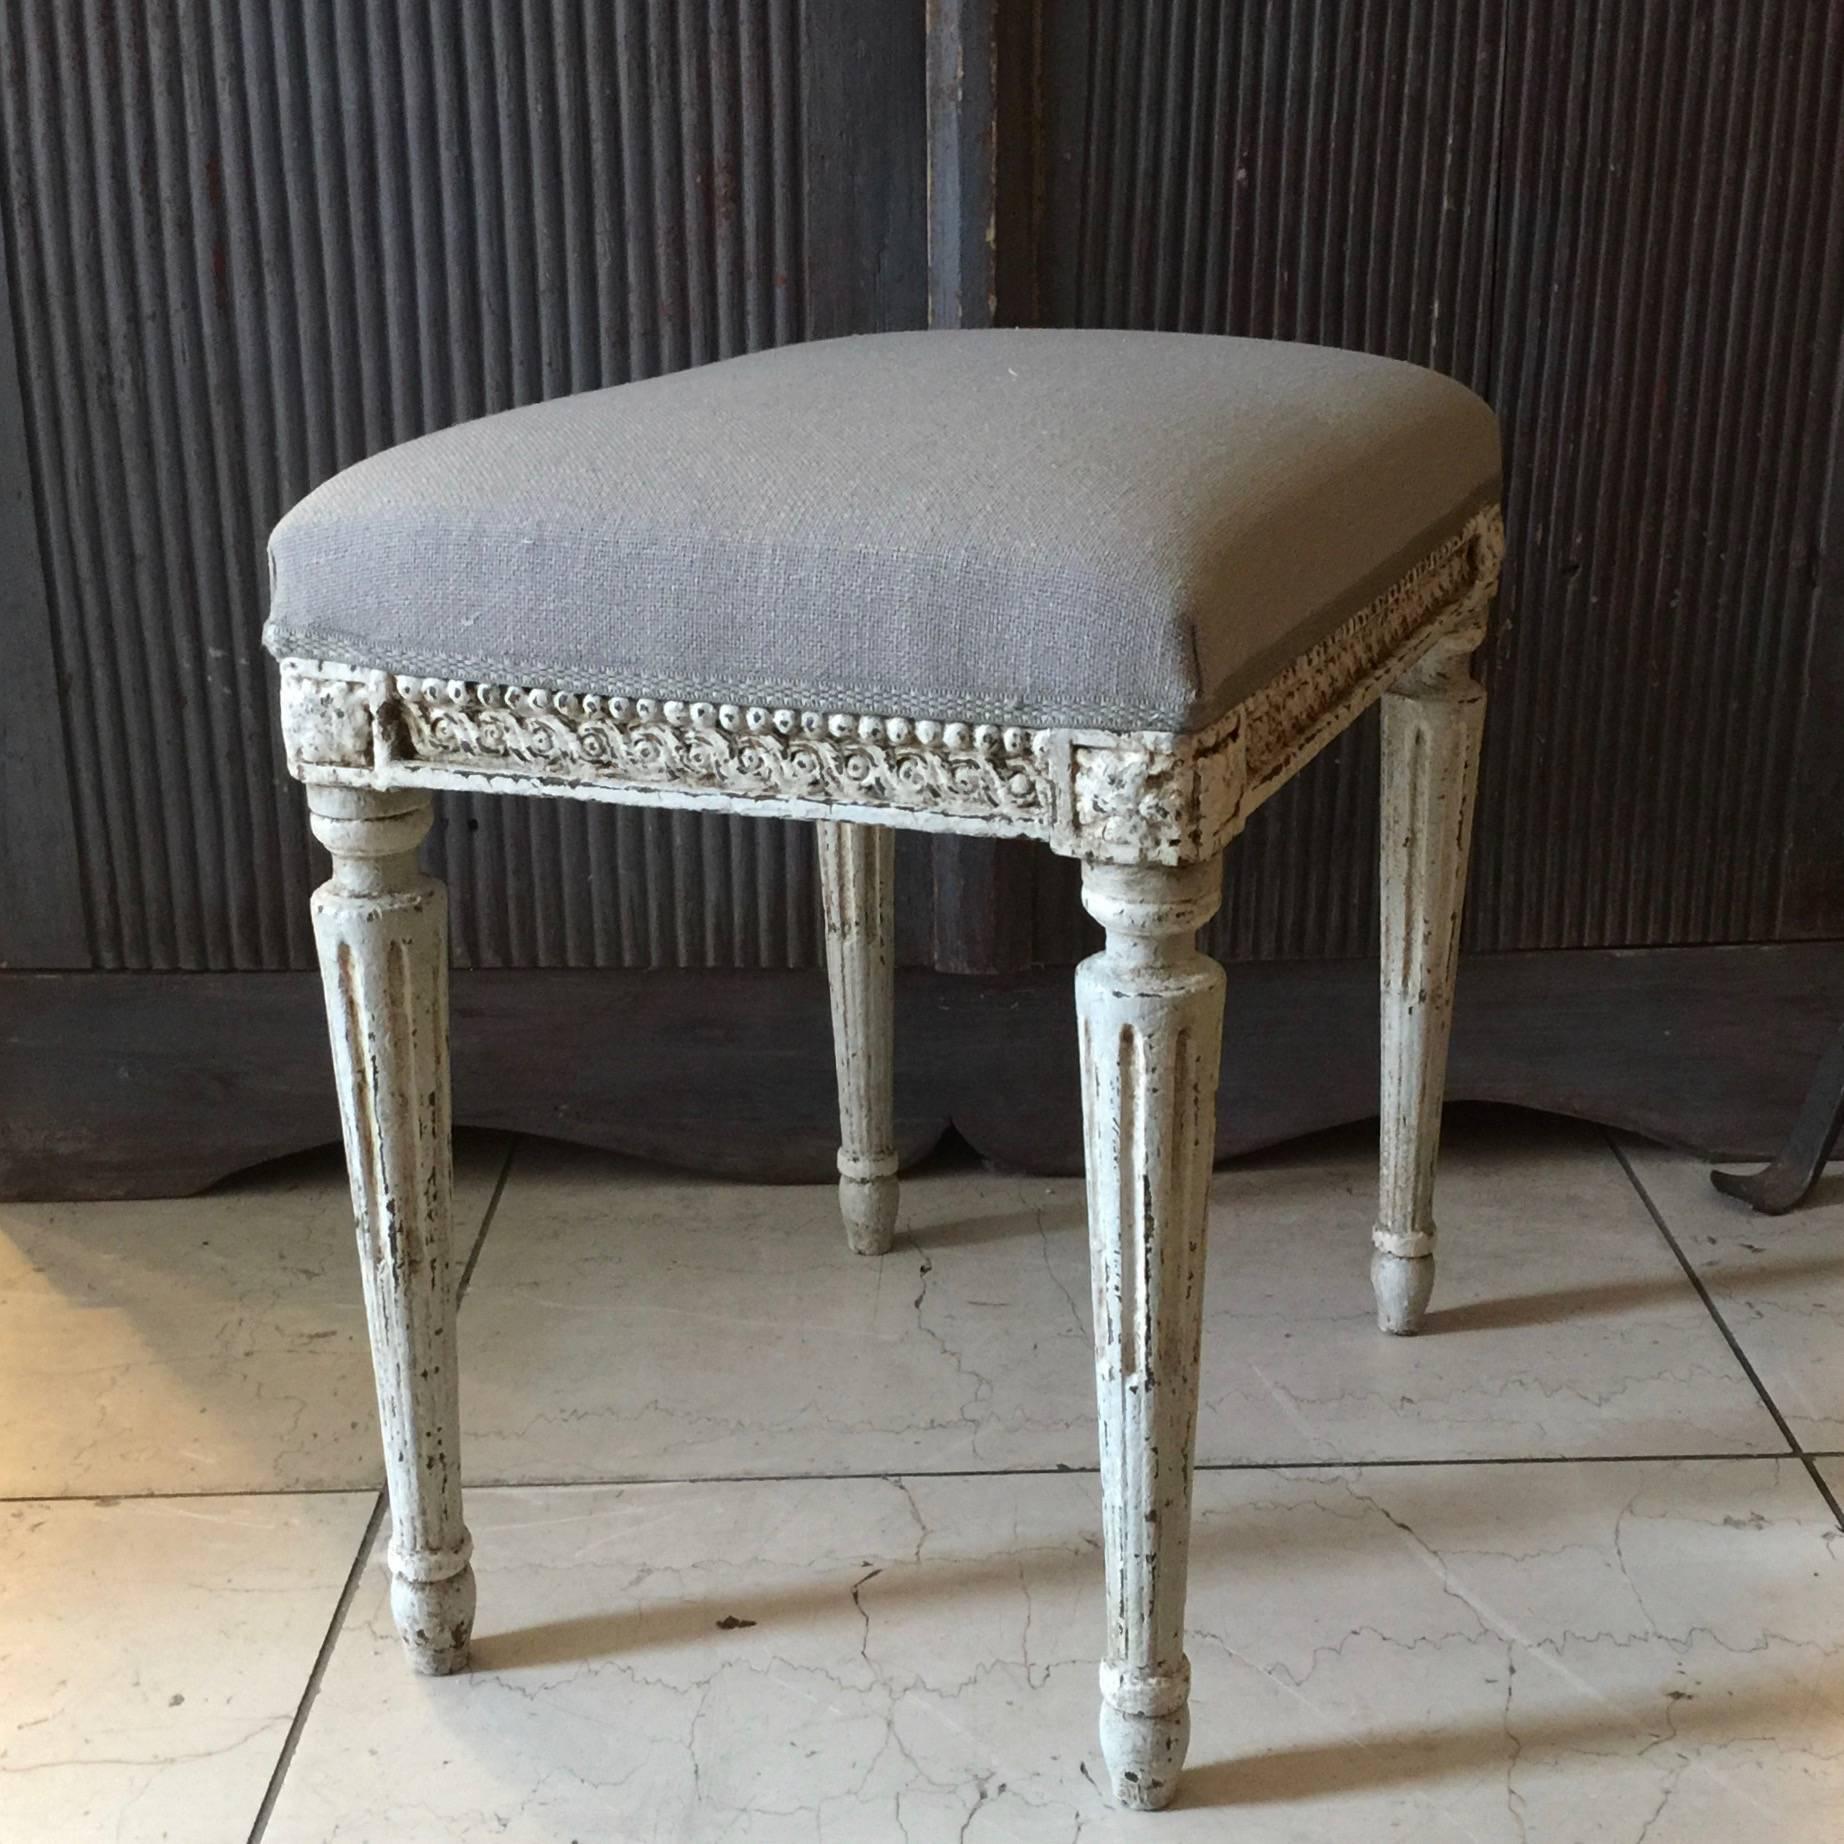 A charming, rectangle in shape, Louis XVI style stool in lovely light blueish grey with legs tapered with flutings and joining dies decorated with a classical daisy motifs. Upholstered in linen fabric,
France, circa 1900.
More than ever, we